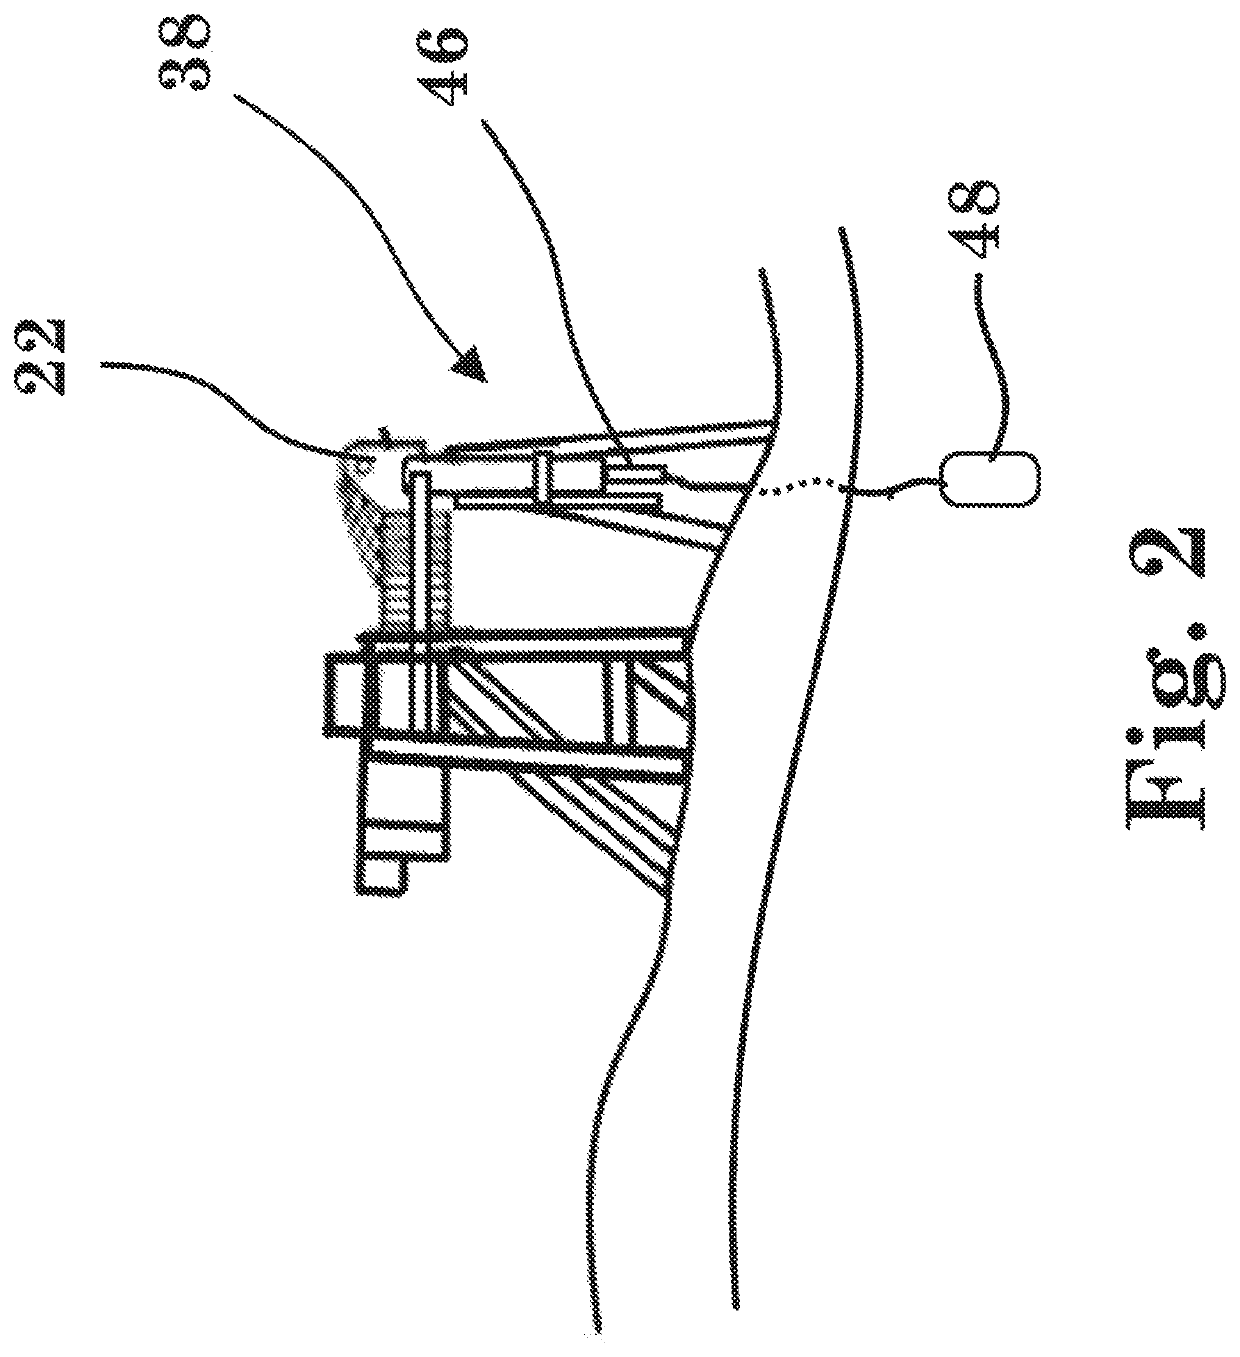 Interlock for a drill rig and method for operating a drill rig